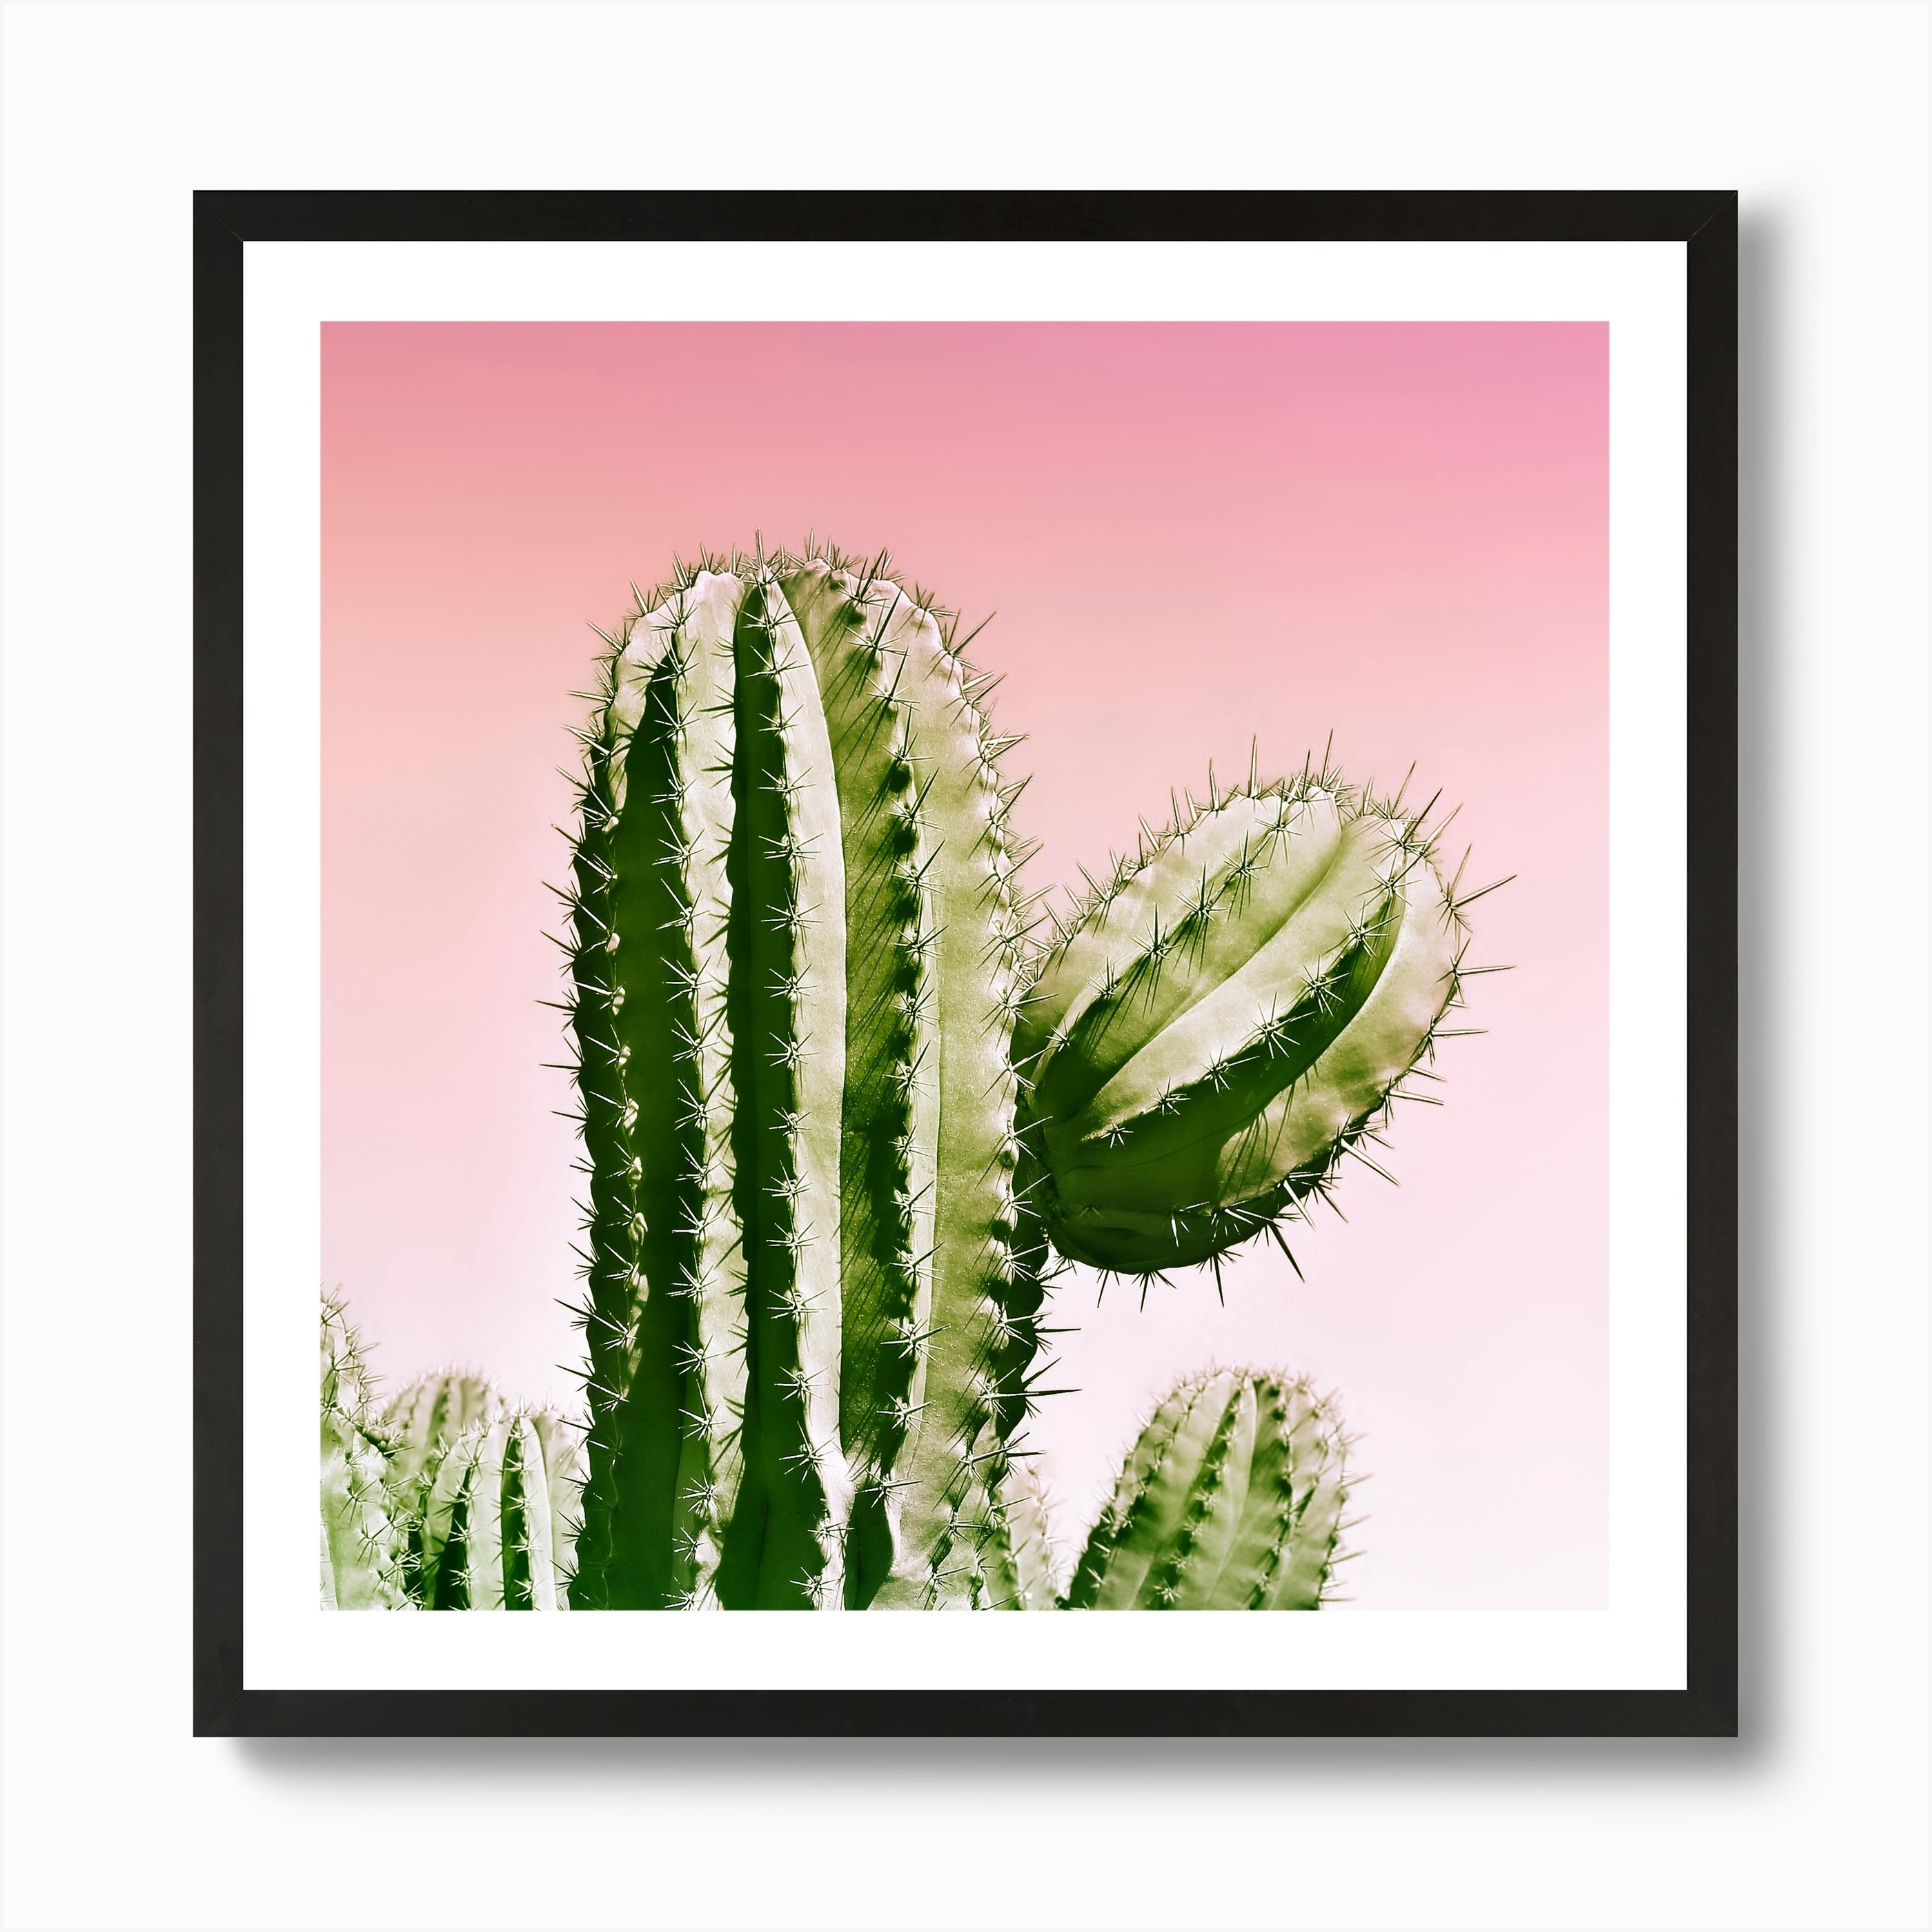 Art print POSTER CANVAS Green Cactus and Yellow Wall